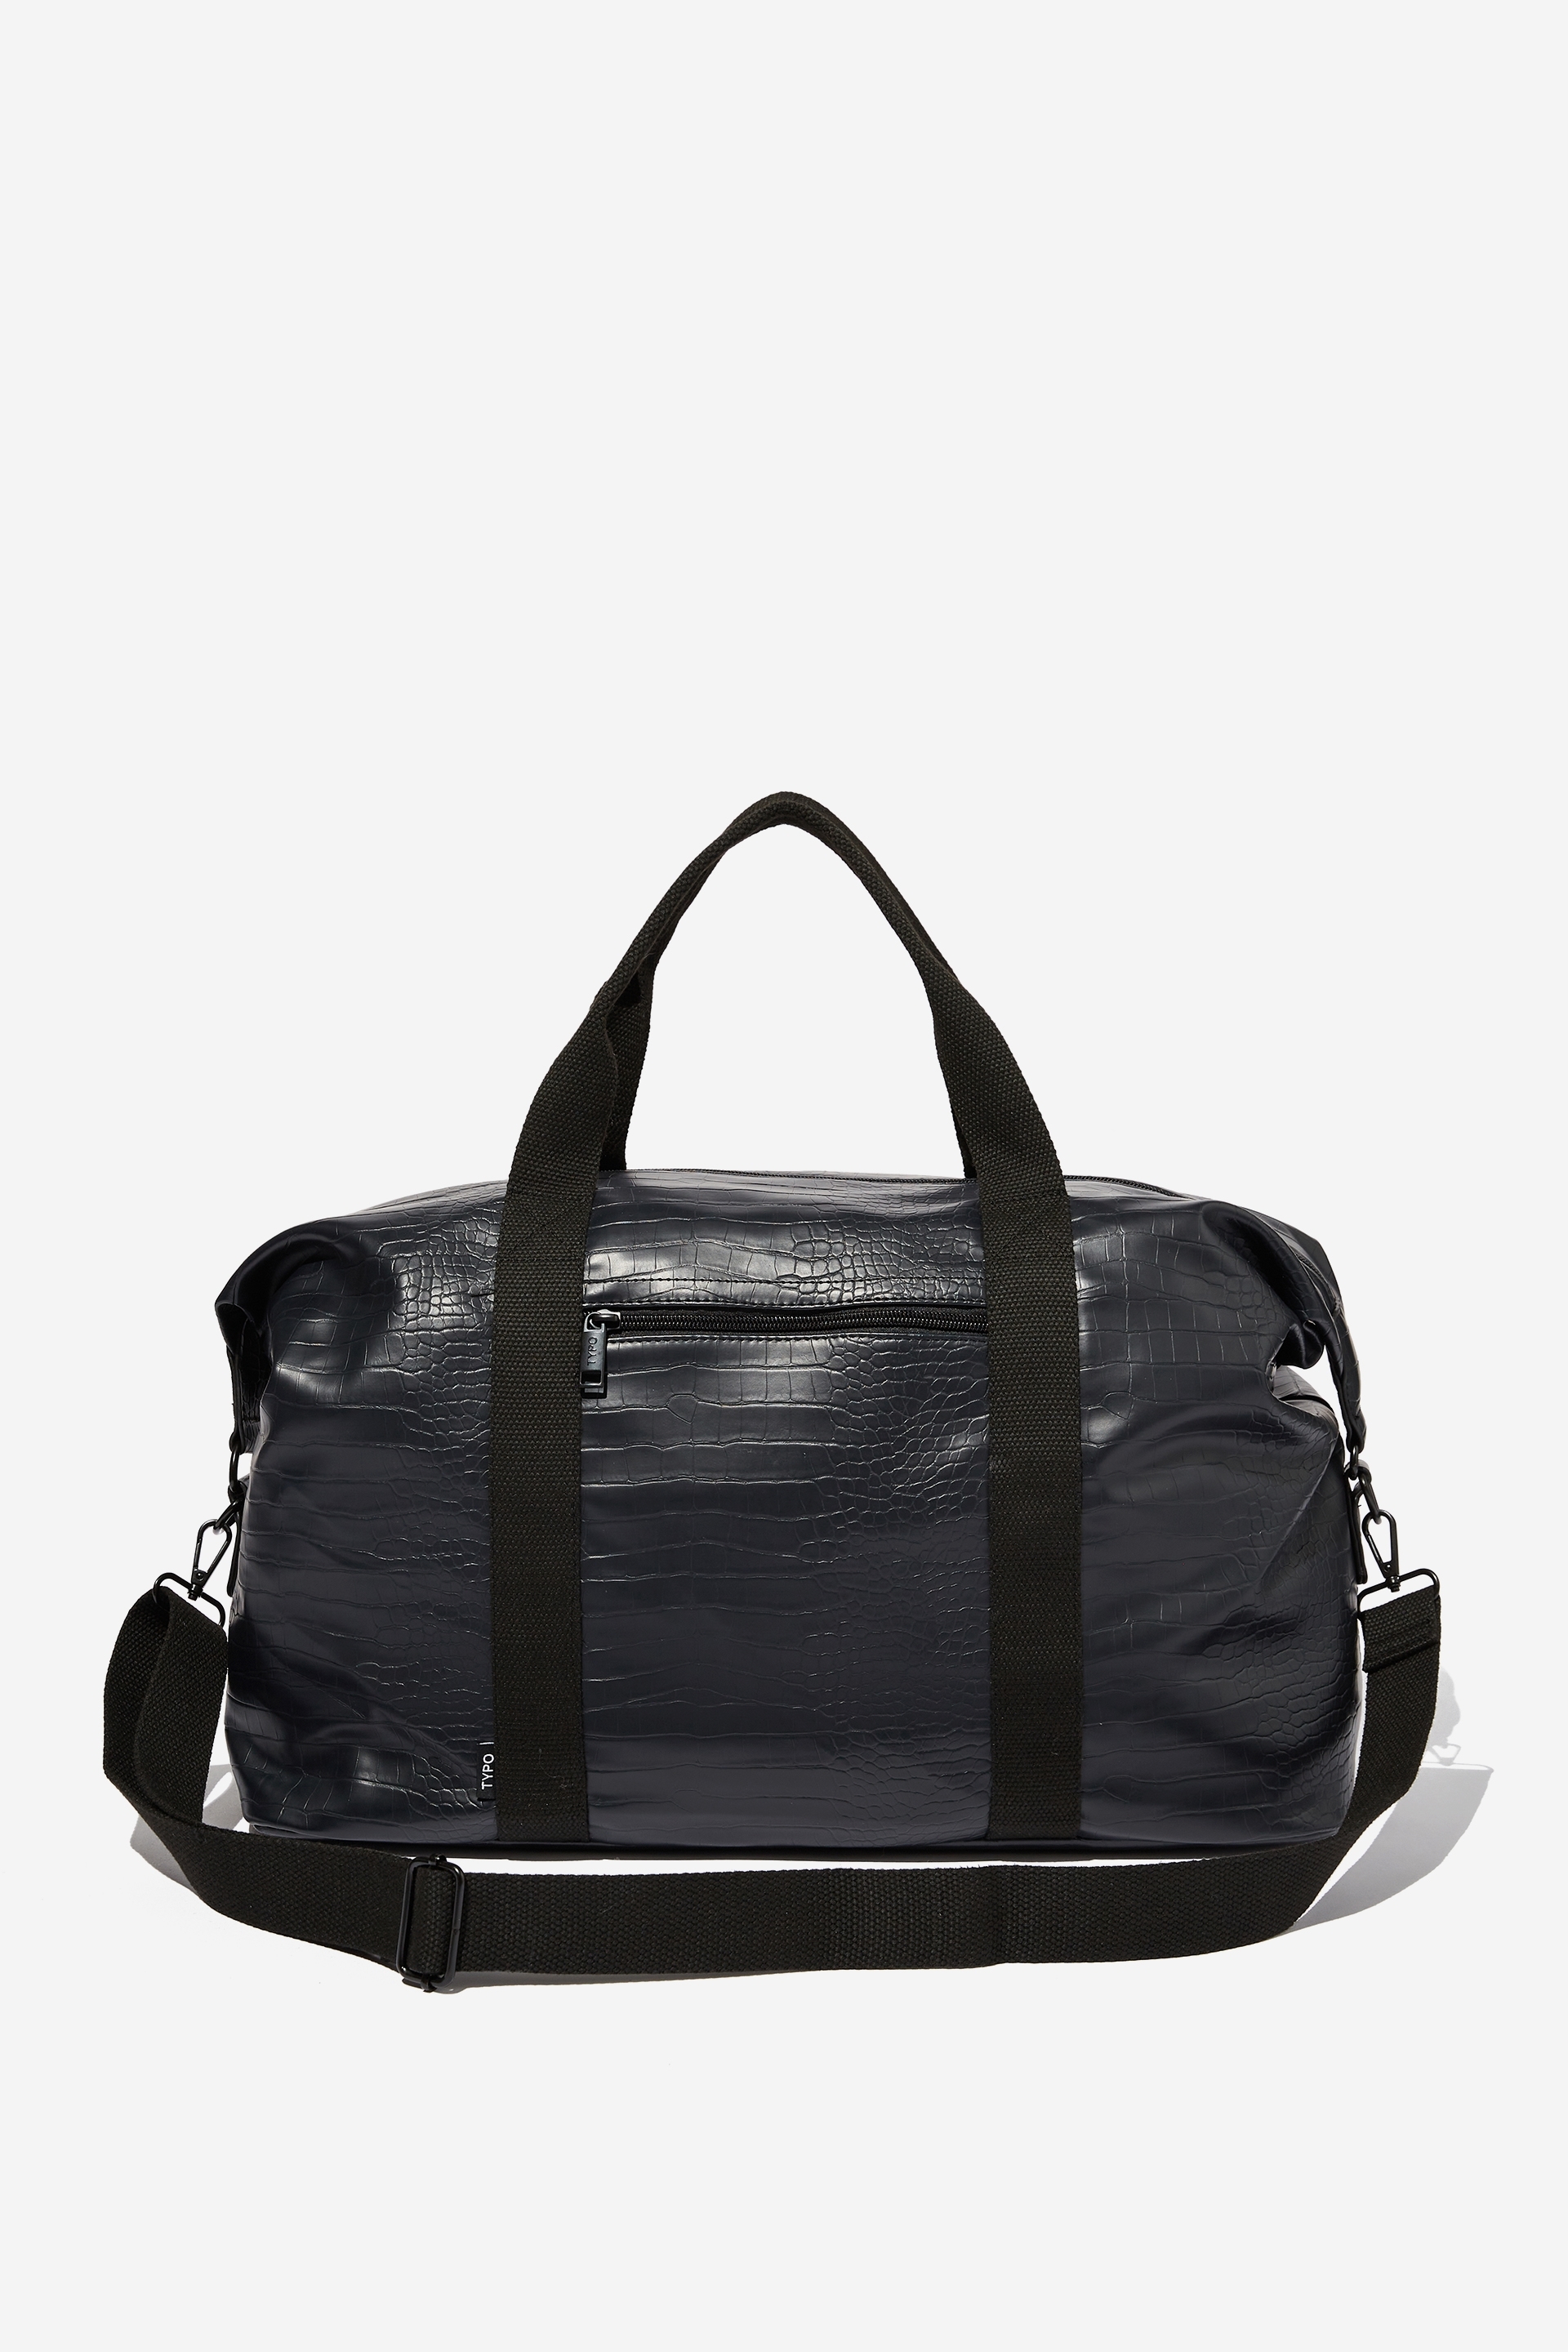 Typo - Off The Grid Hold All Duffle Bag - Black textured